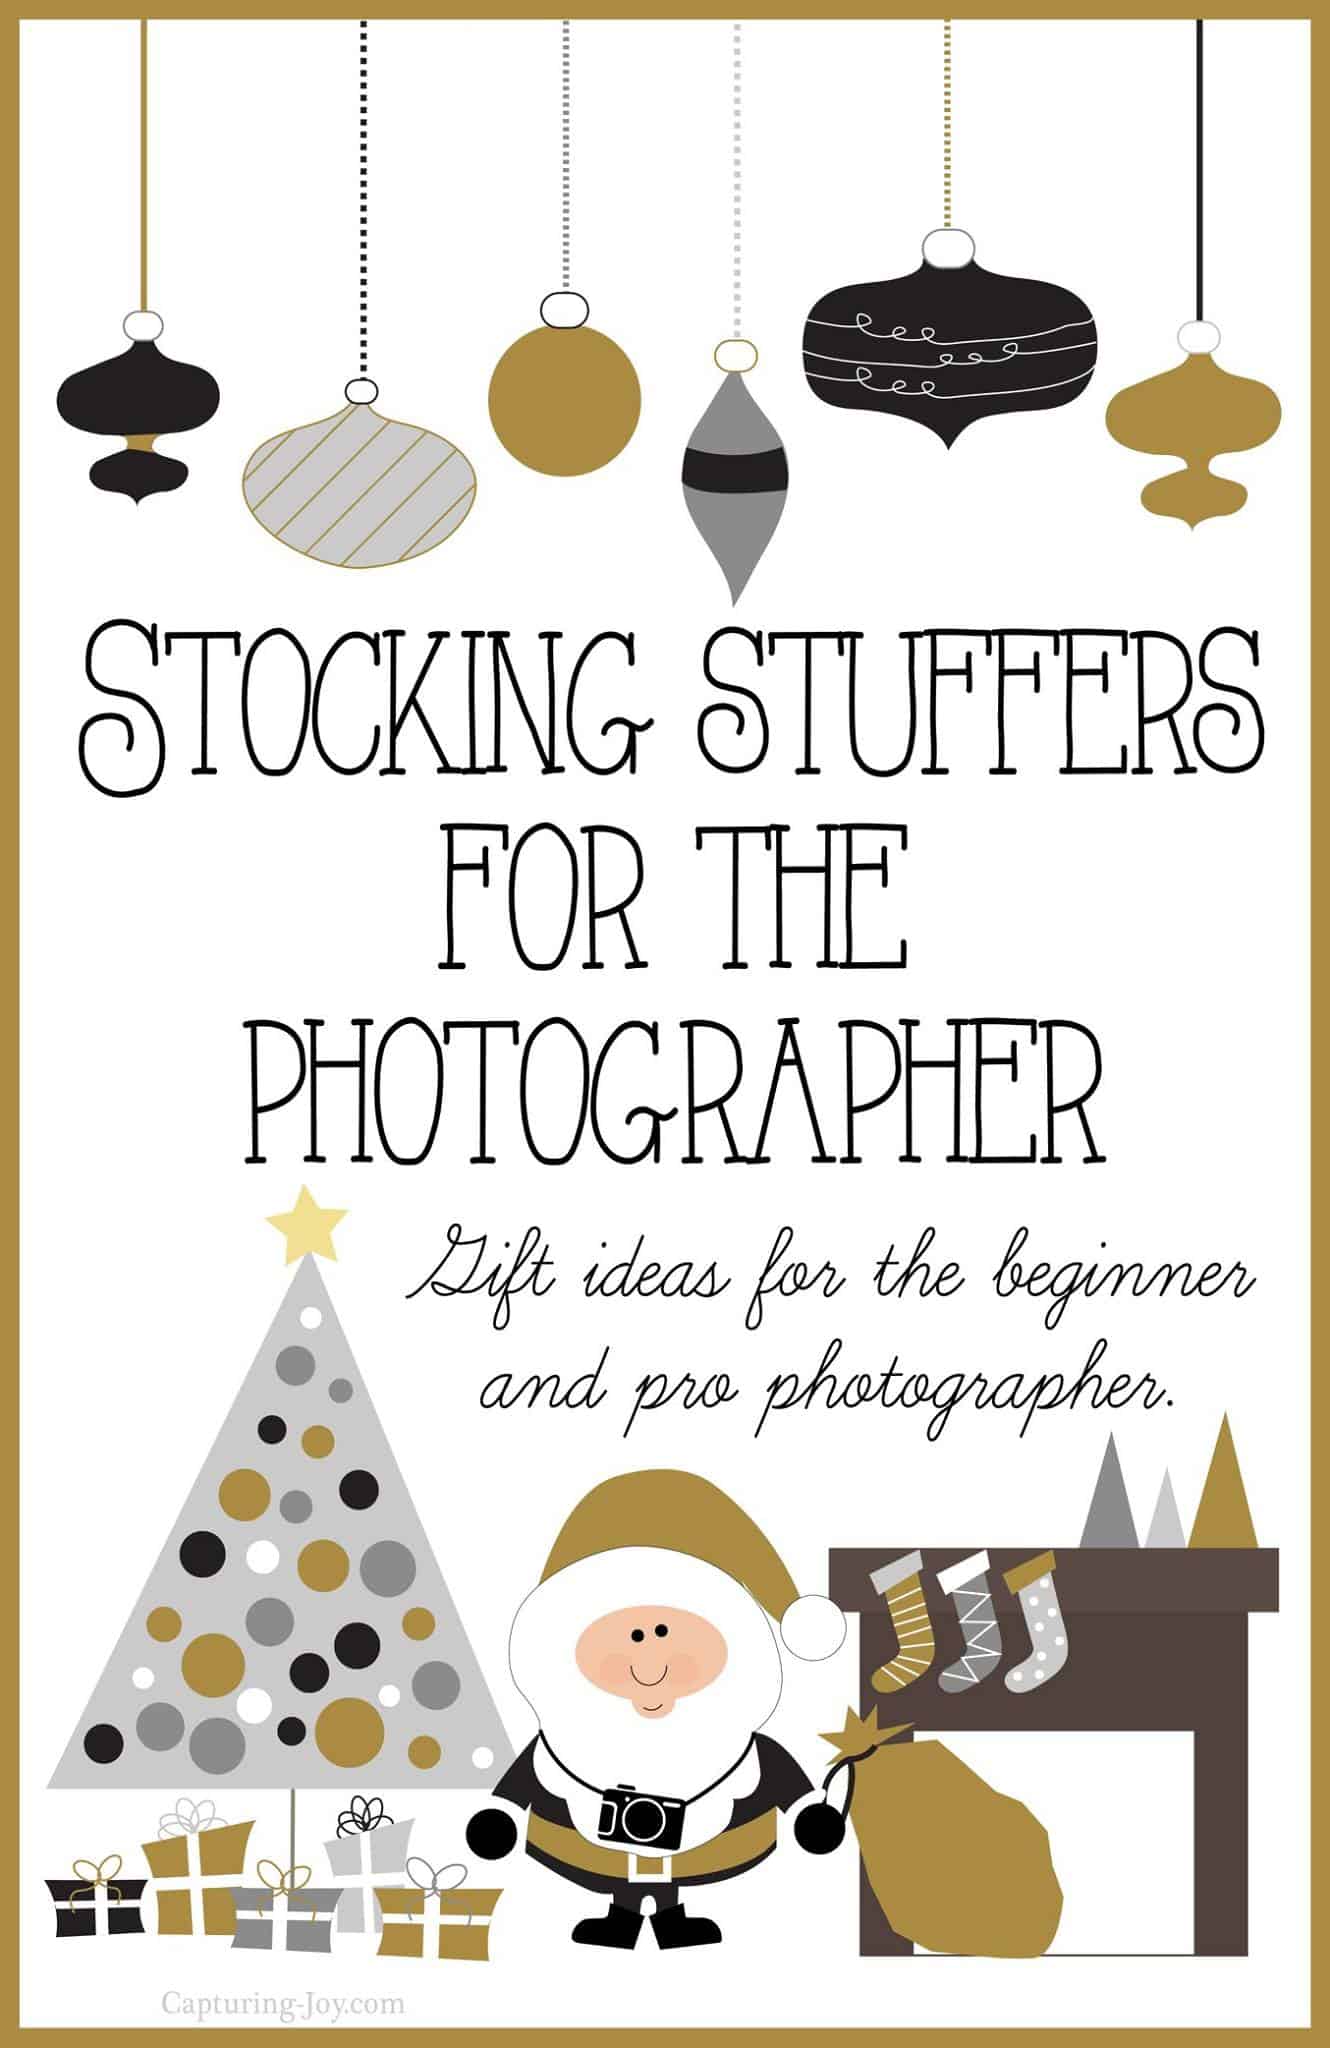 Stocking Stuffer Ideas for the Photographer